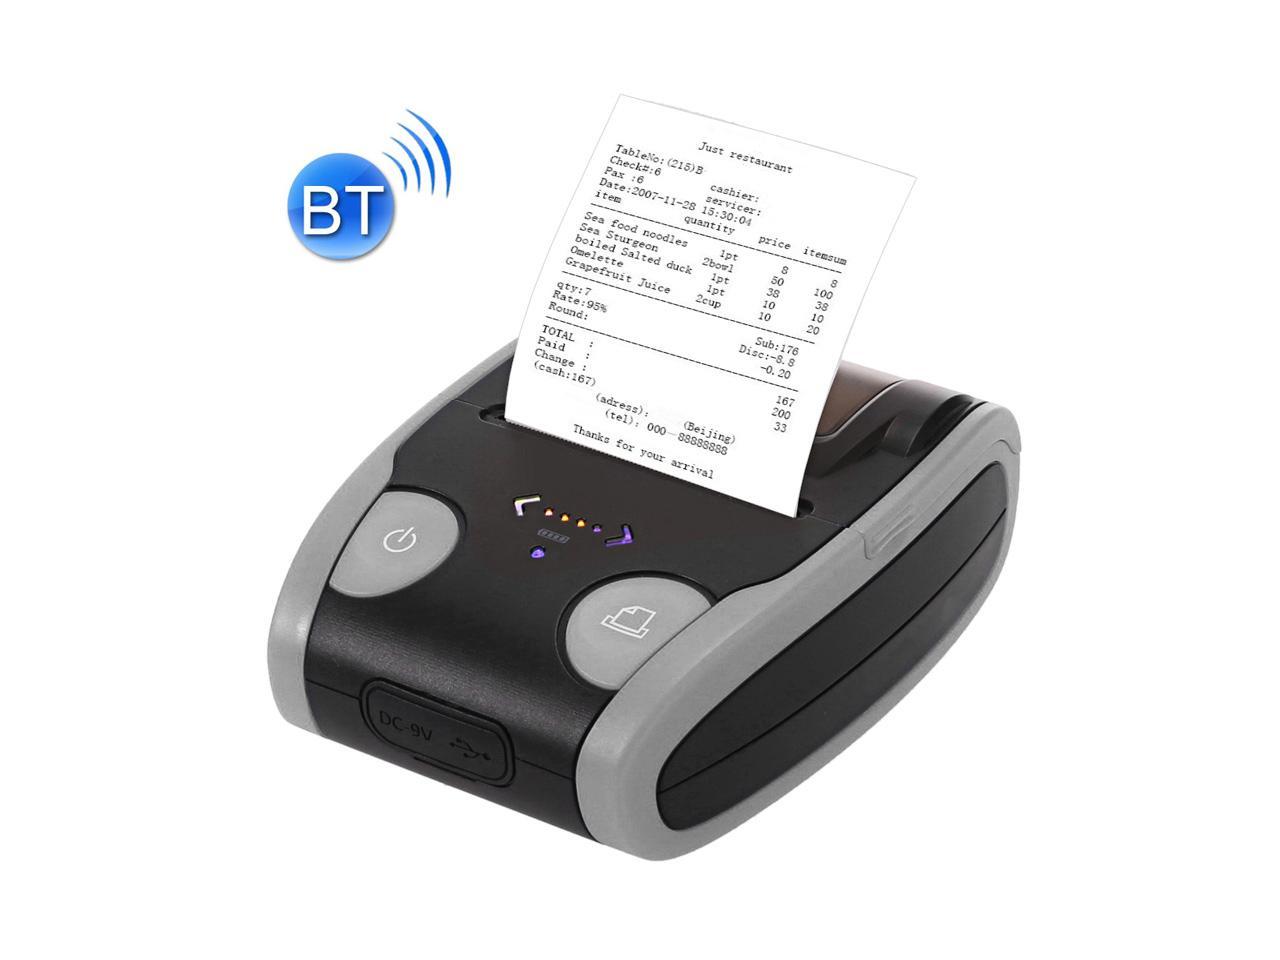 Receipt Notes Label Thermal Printer 7789 Thermal Portable Bluetooth Printer Image 